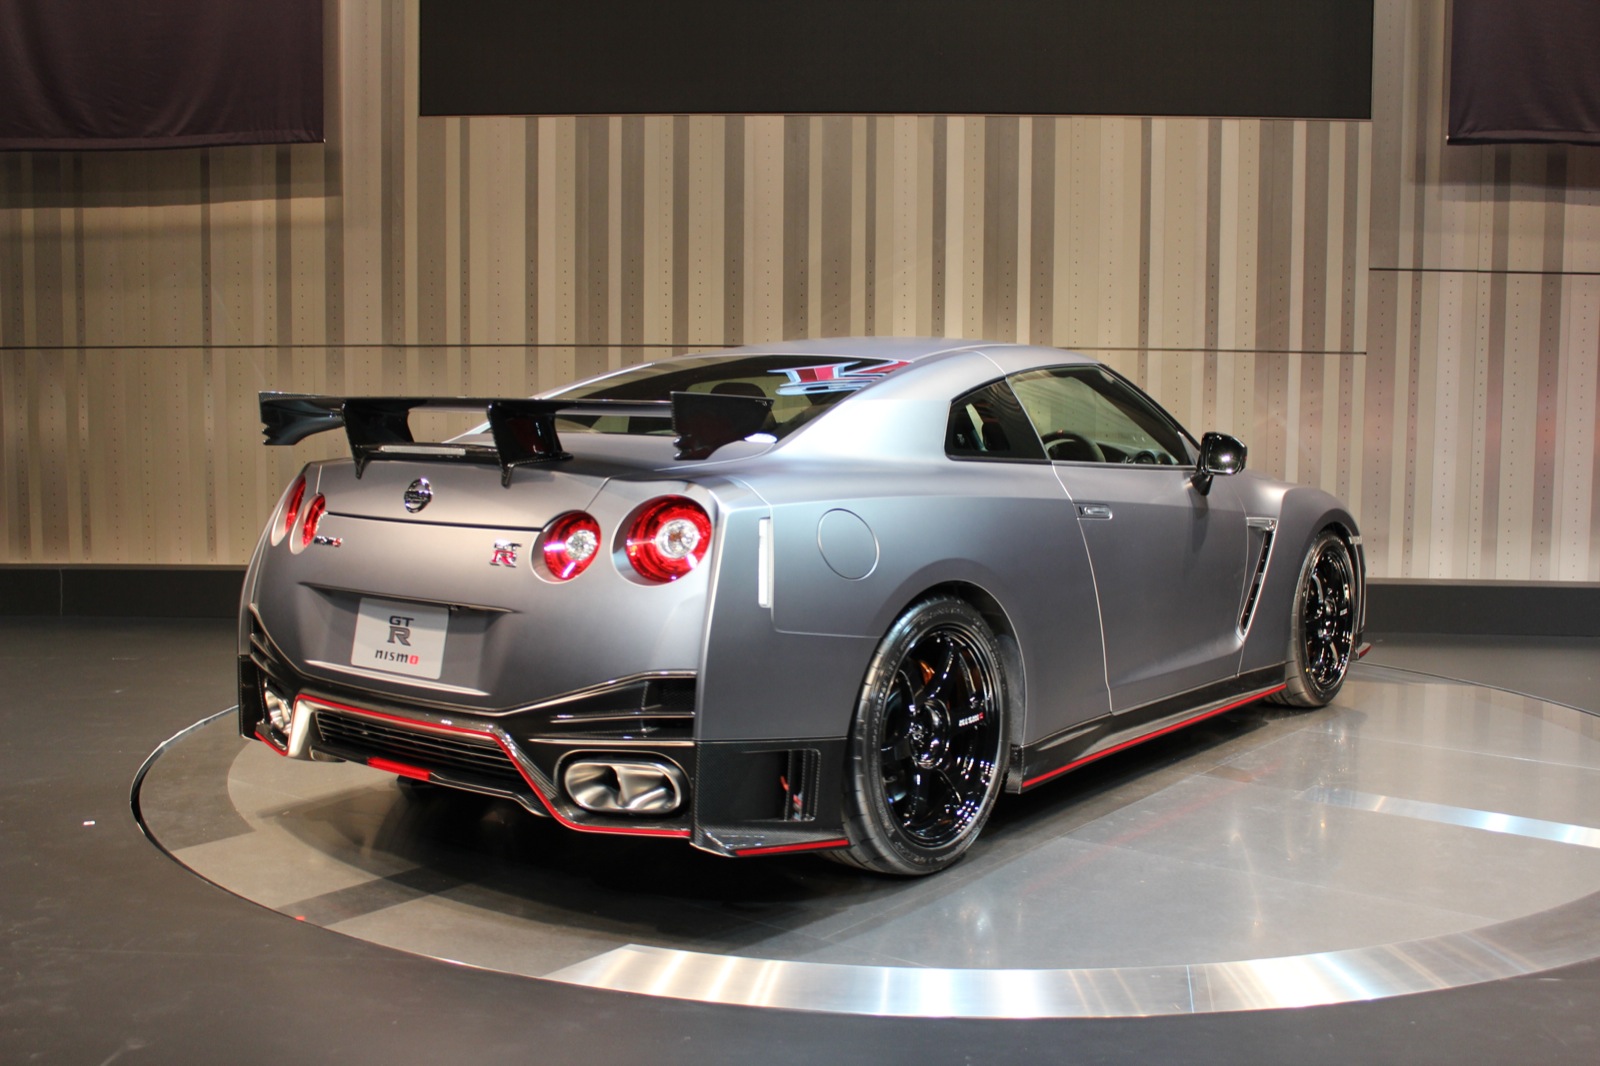 2015-nissan-gt-r-nismo--tokyo-motor-show-preview-event-nissan-global-headquarters_100446453_h